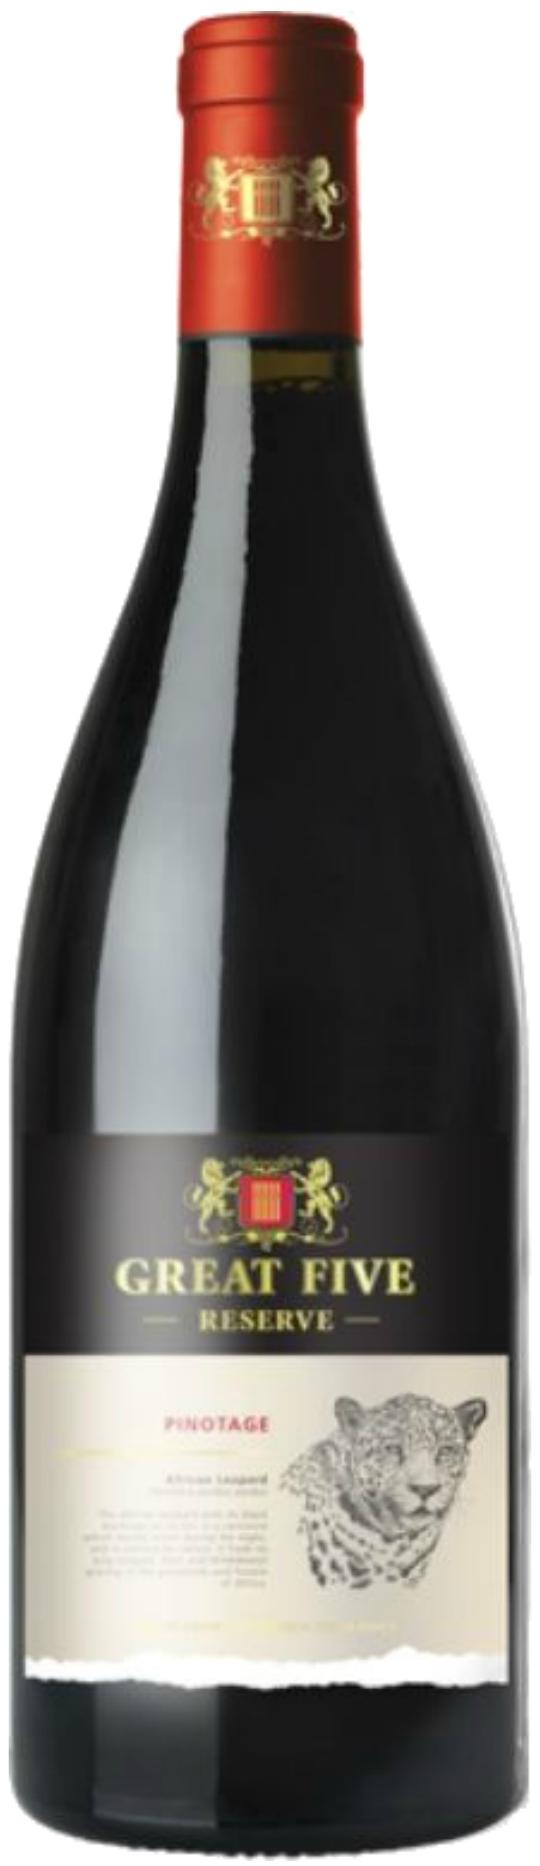 Curry Five Pinotage oHG Südafrika, (Rotwein, Western Cape) Wines | Great Reserve Premium Stellenview